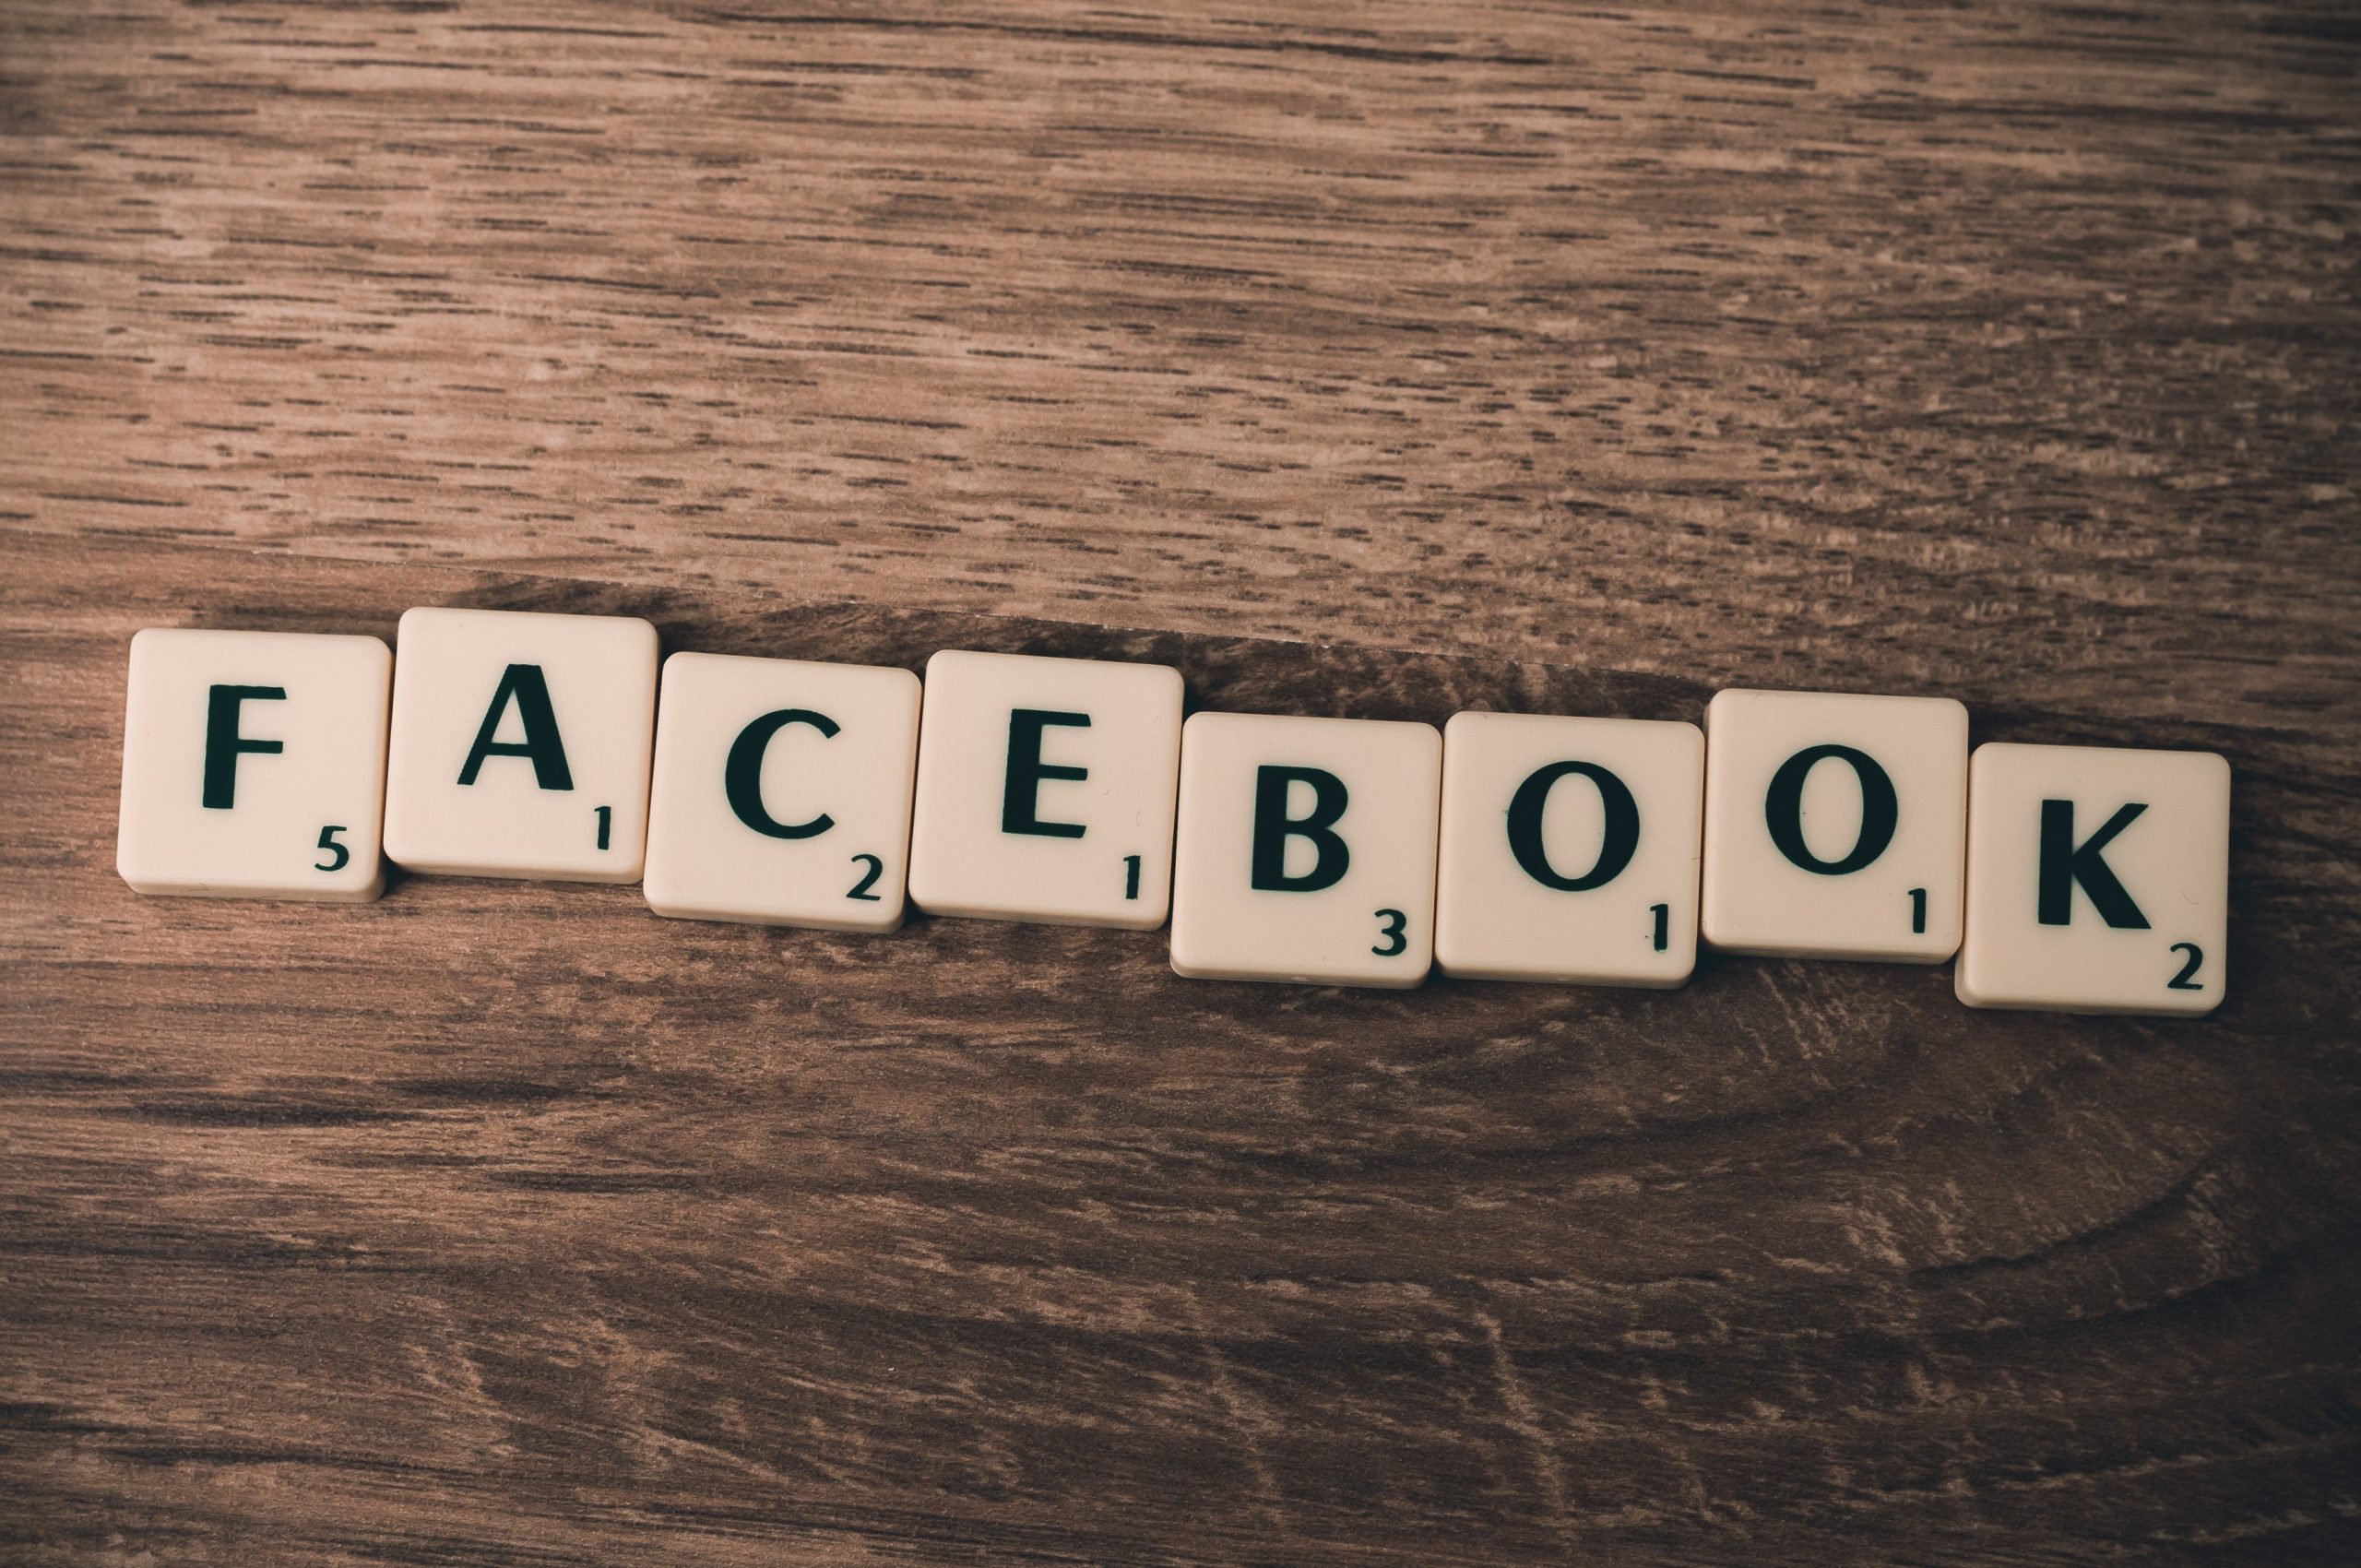 12 expert tips to optimize your Facebook business page